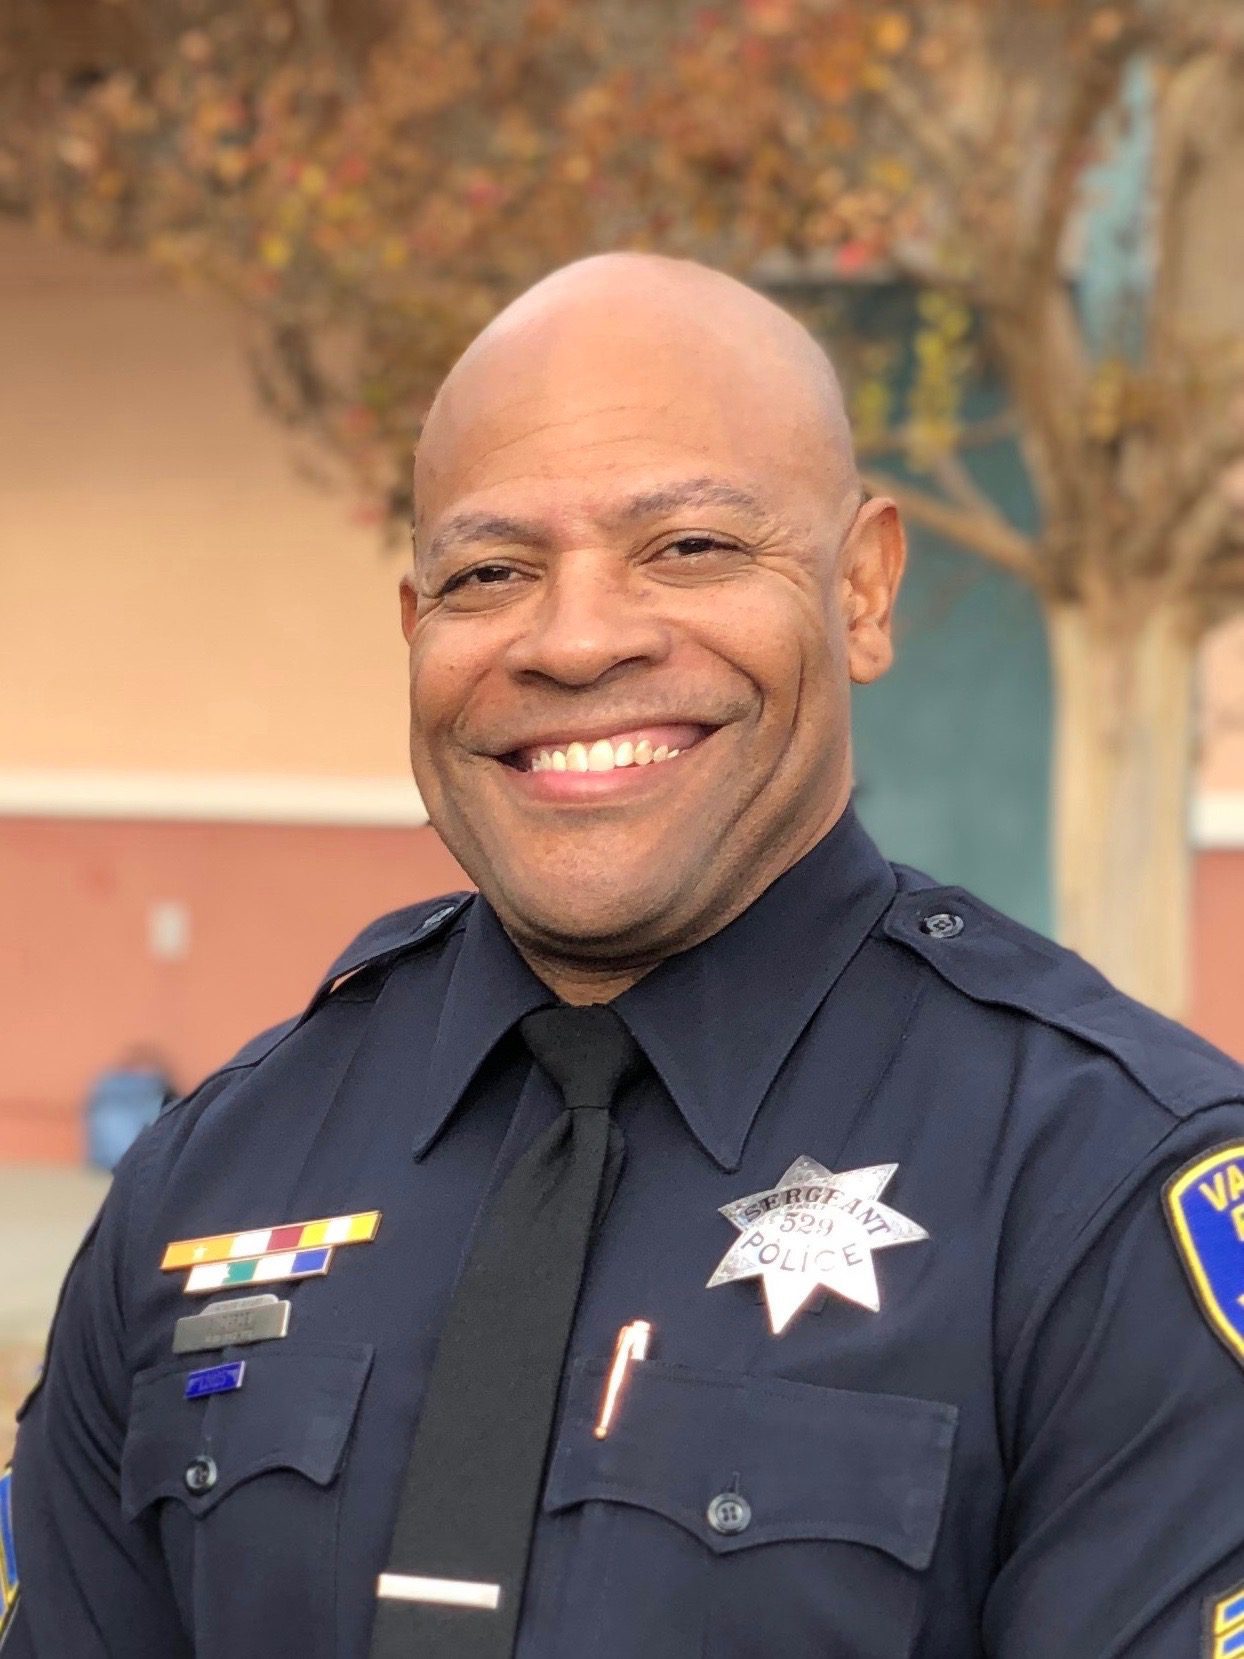 Steve Darden, Vallejo's most lethal officer of the past 20 years, said allegations he bent his badge are "a lie." He is seen here in a Mar. 24, 2020 Vallejo Police Department Facebook post announcing his promotion to lieutenant. Vallejo's shooters typically bend their badges at the 3 o'clock and 4 o'clock points.